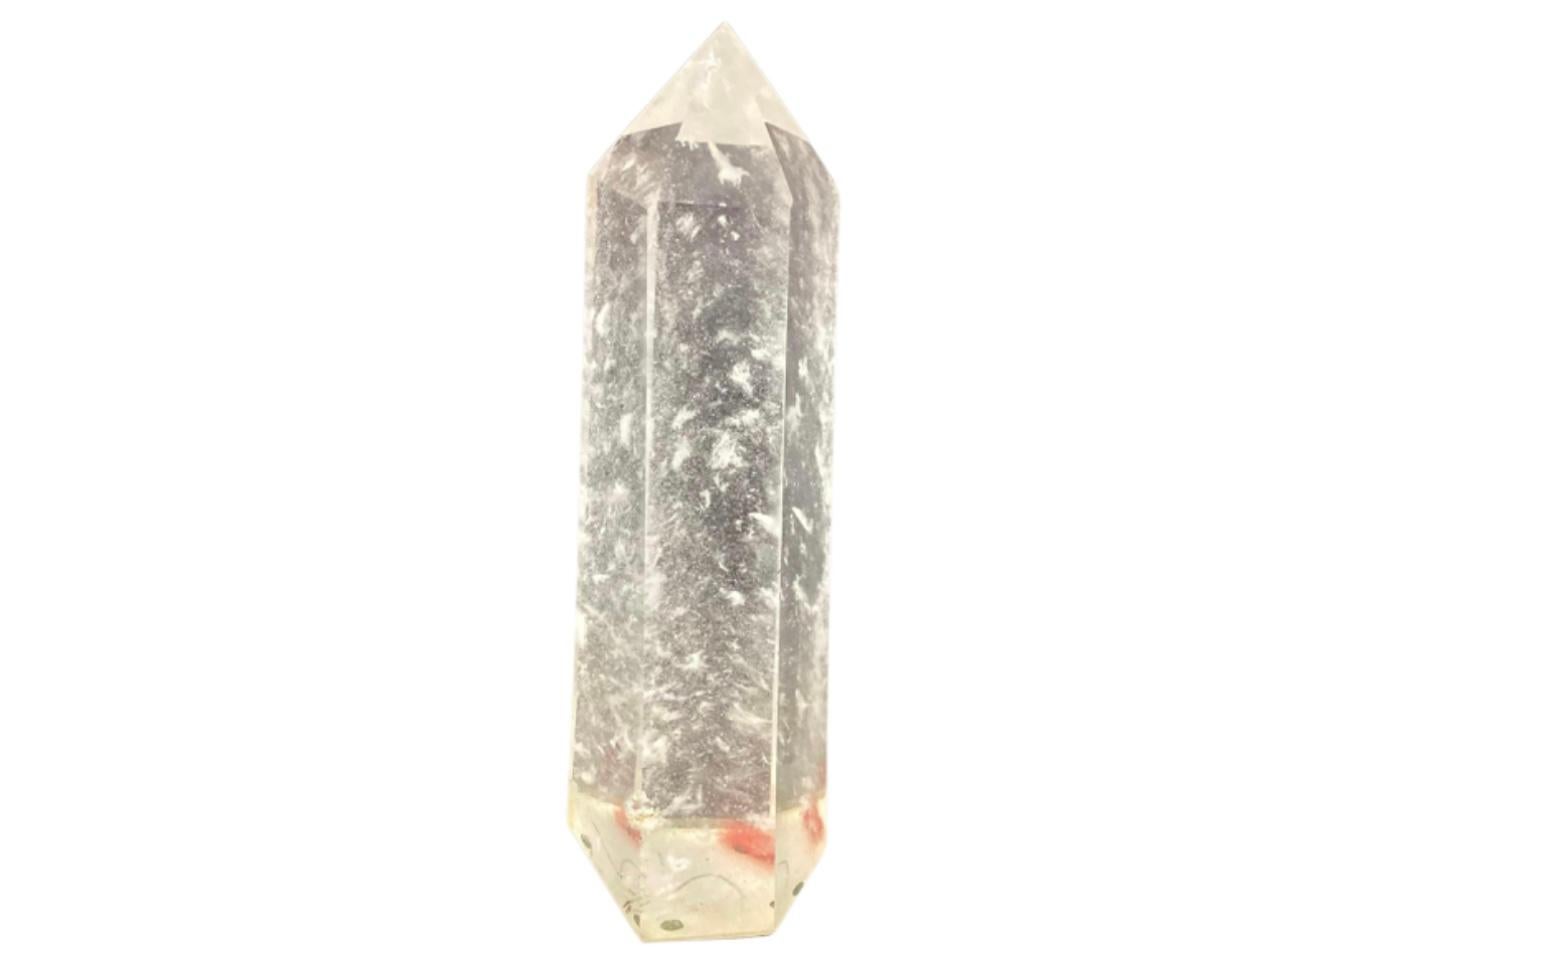 Beautiful clear quartz crystal obelisk. Clear quartz is thought to amplify energy and thought. Obelisk contains natural occlusions, which is normal and does not indicate a defect.